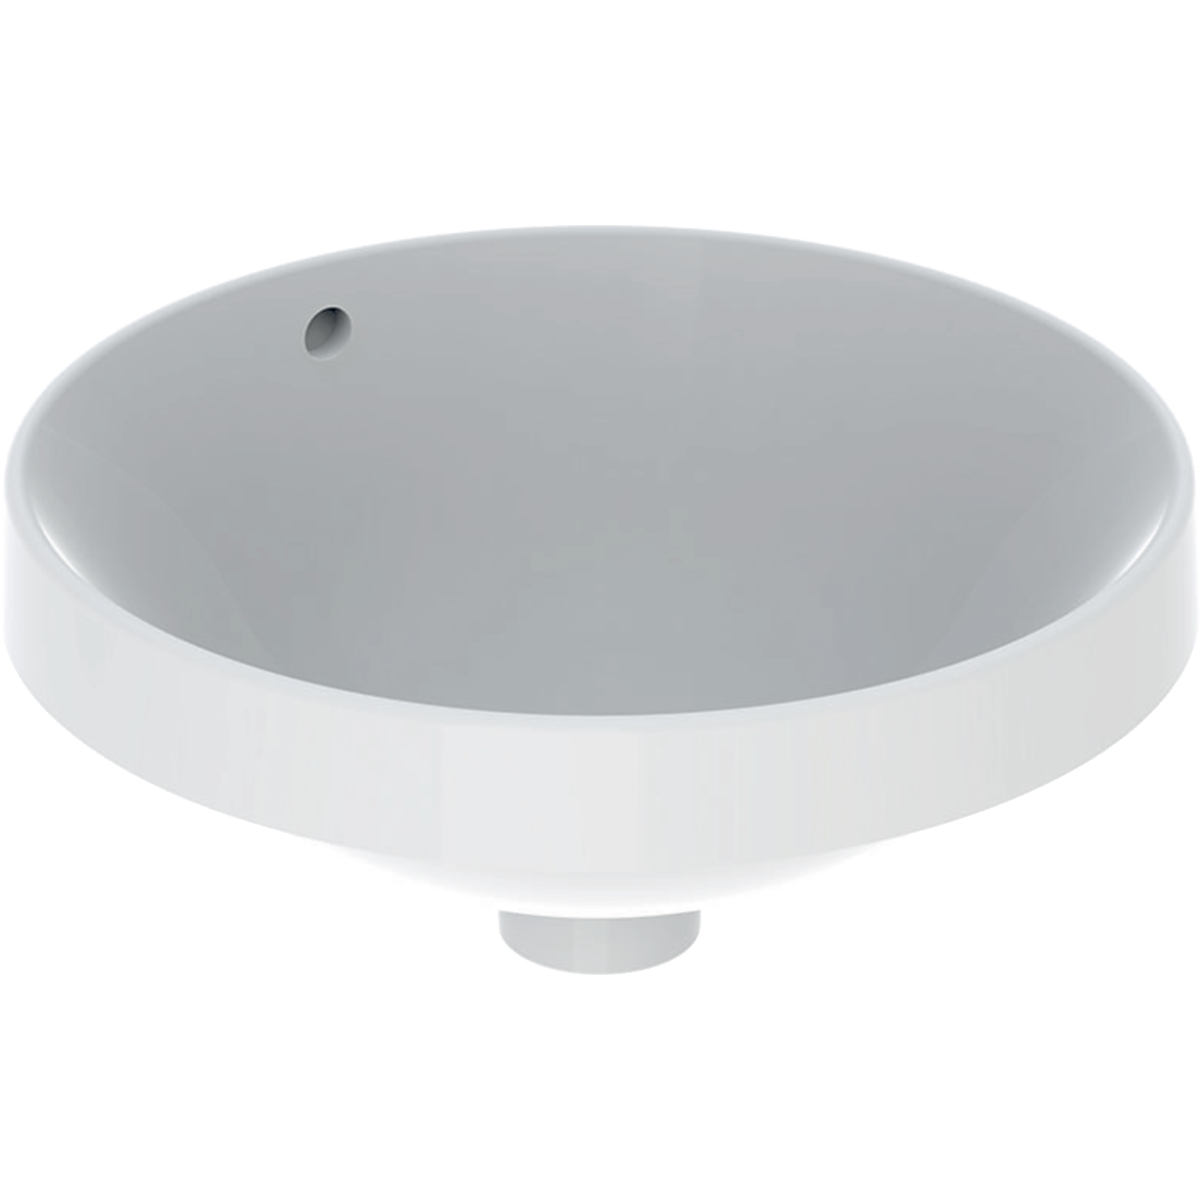 VariForm round 40cm countertop nth basin with overflow